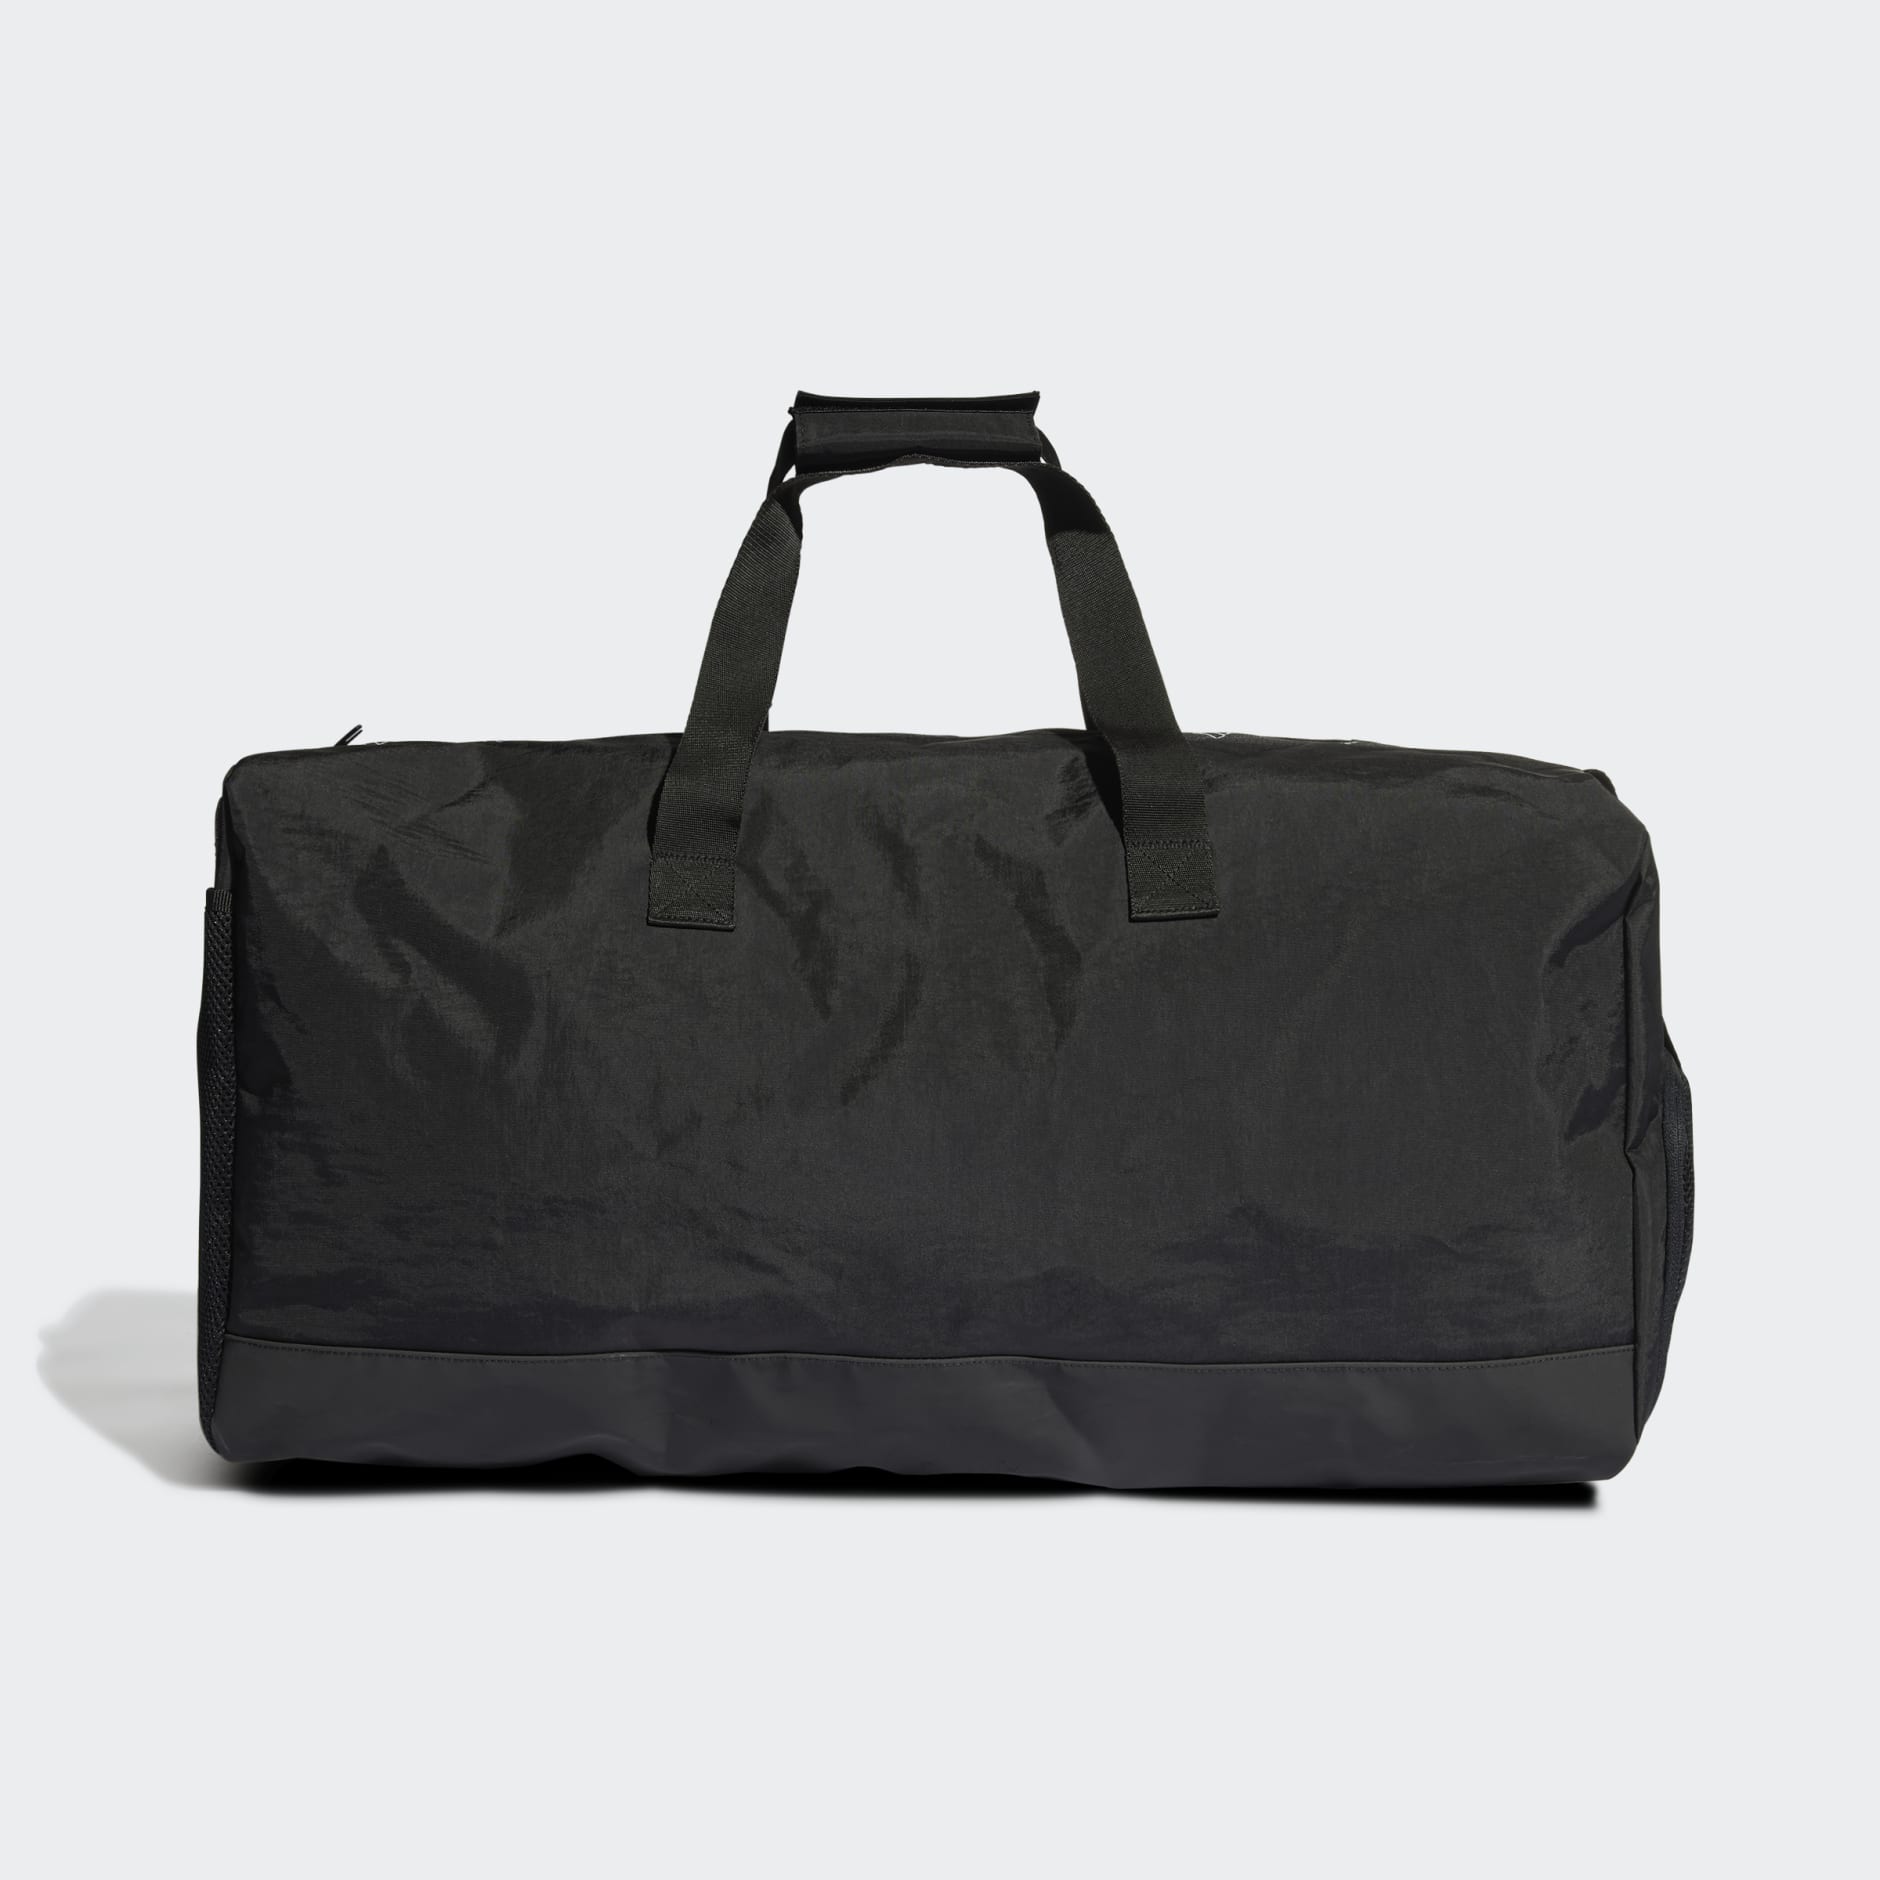 Accessories - 4ATHLTS Duffel Bag Large - Black | adidas South Africa